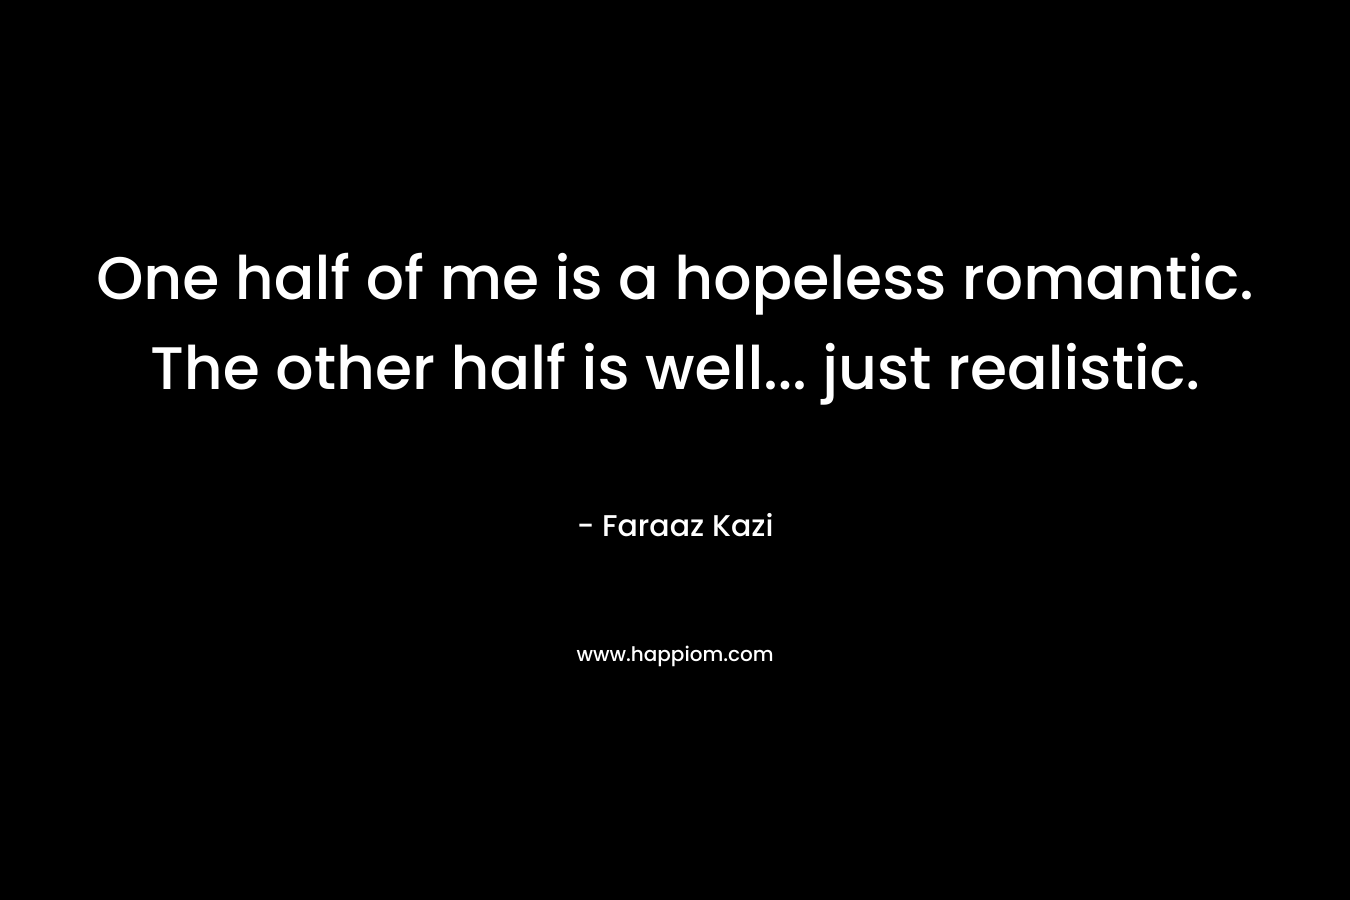 One half of me is a hopeless romantic. The other half is well... just realistic.